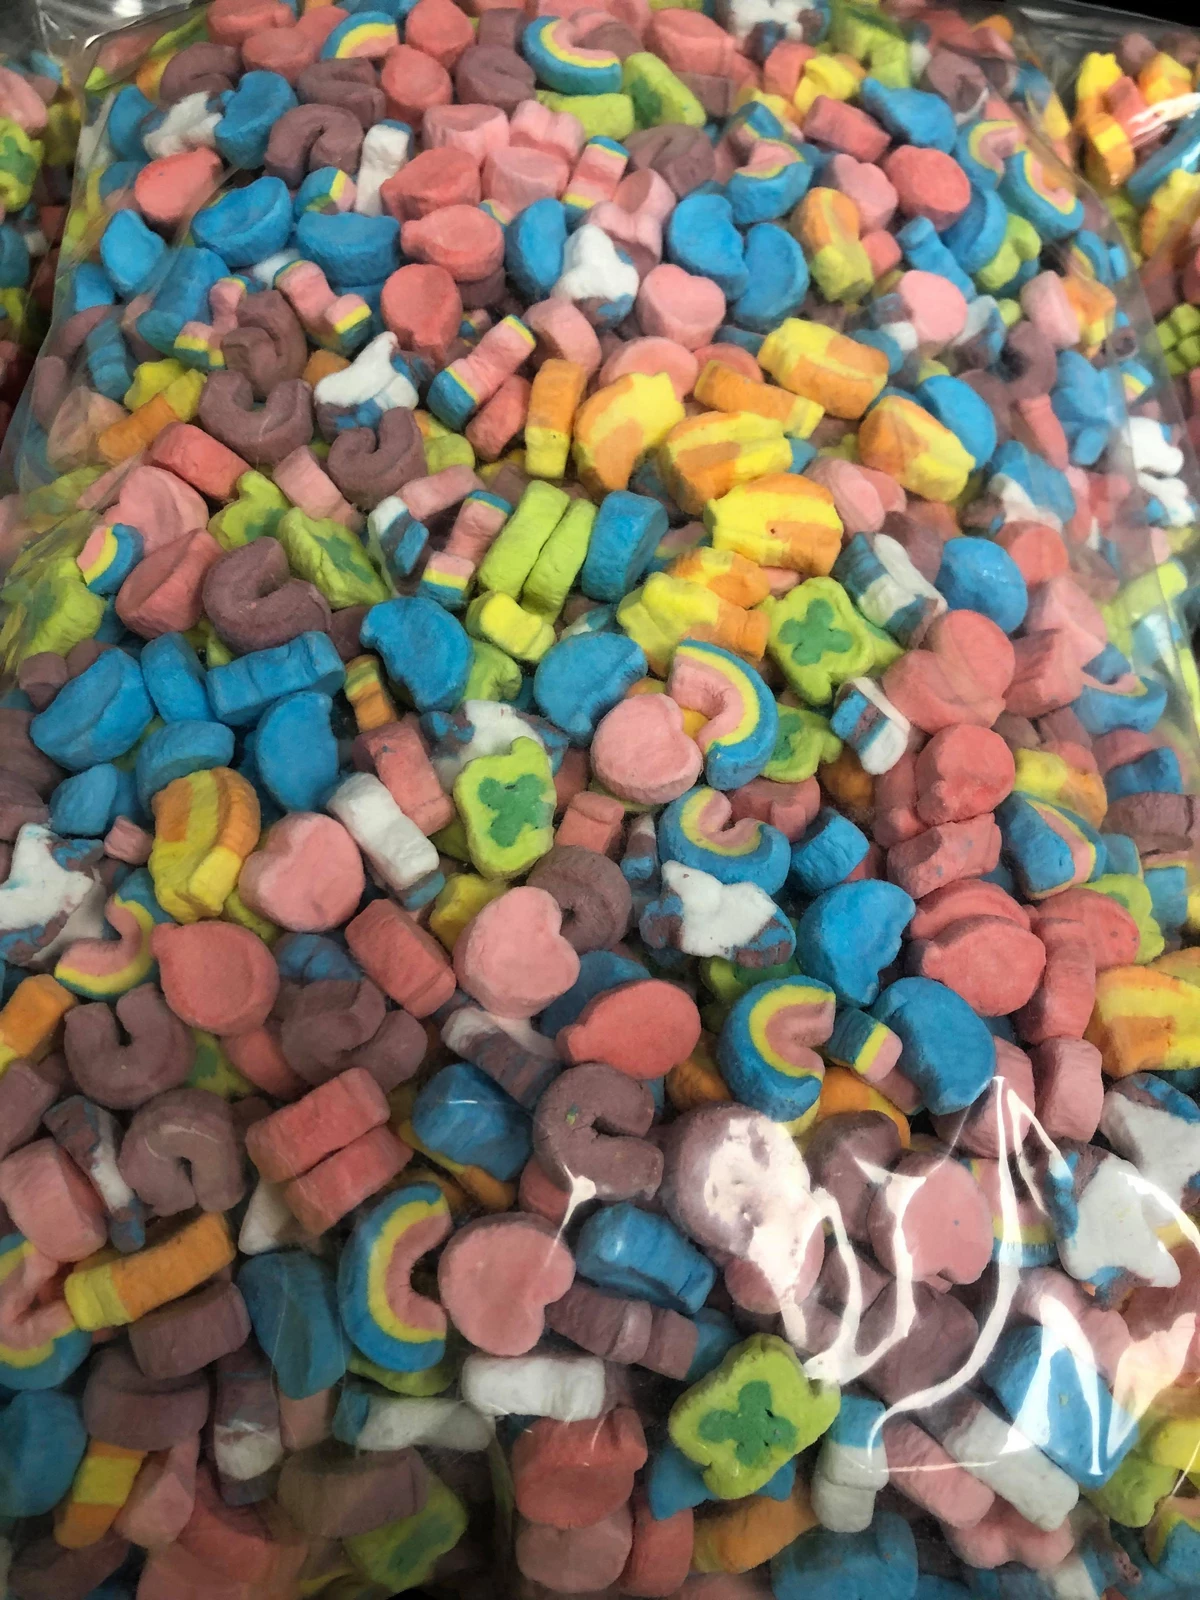 Marshmallow-Only Lucky Charms Coming SOON